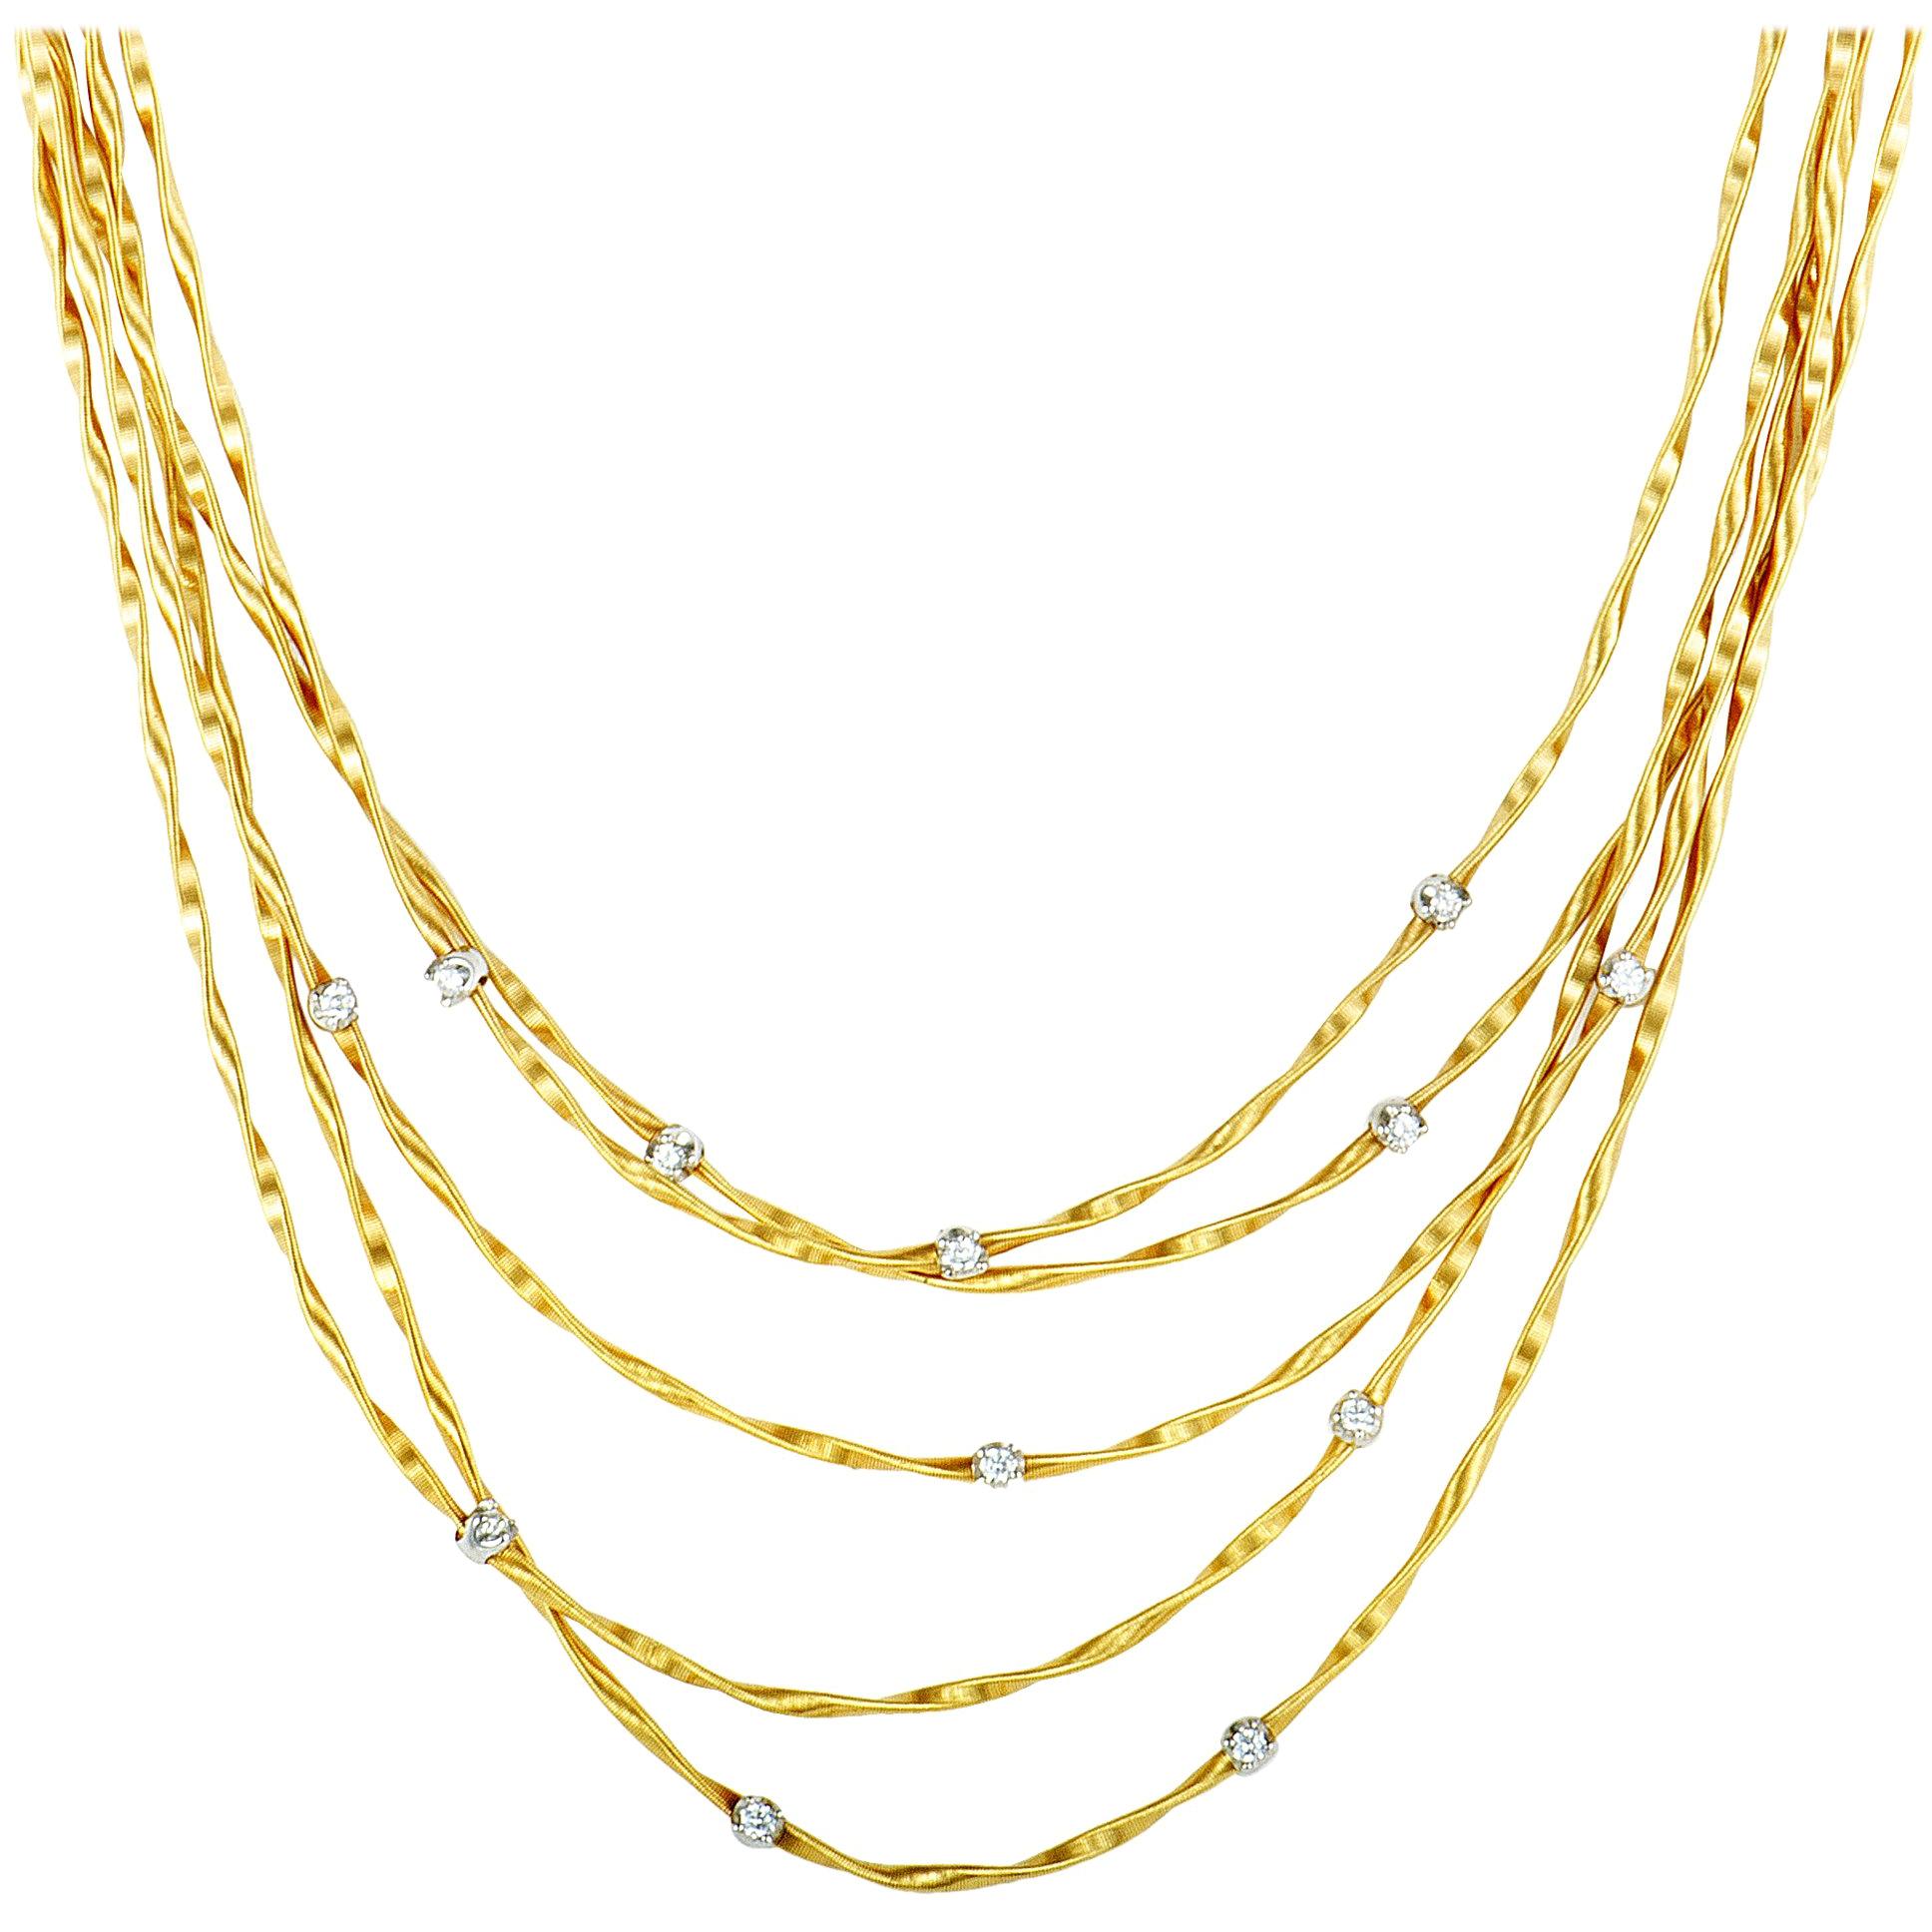 MarCo Bicego Marrakech Diamond Yellow and White Gold Strand Necklace